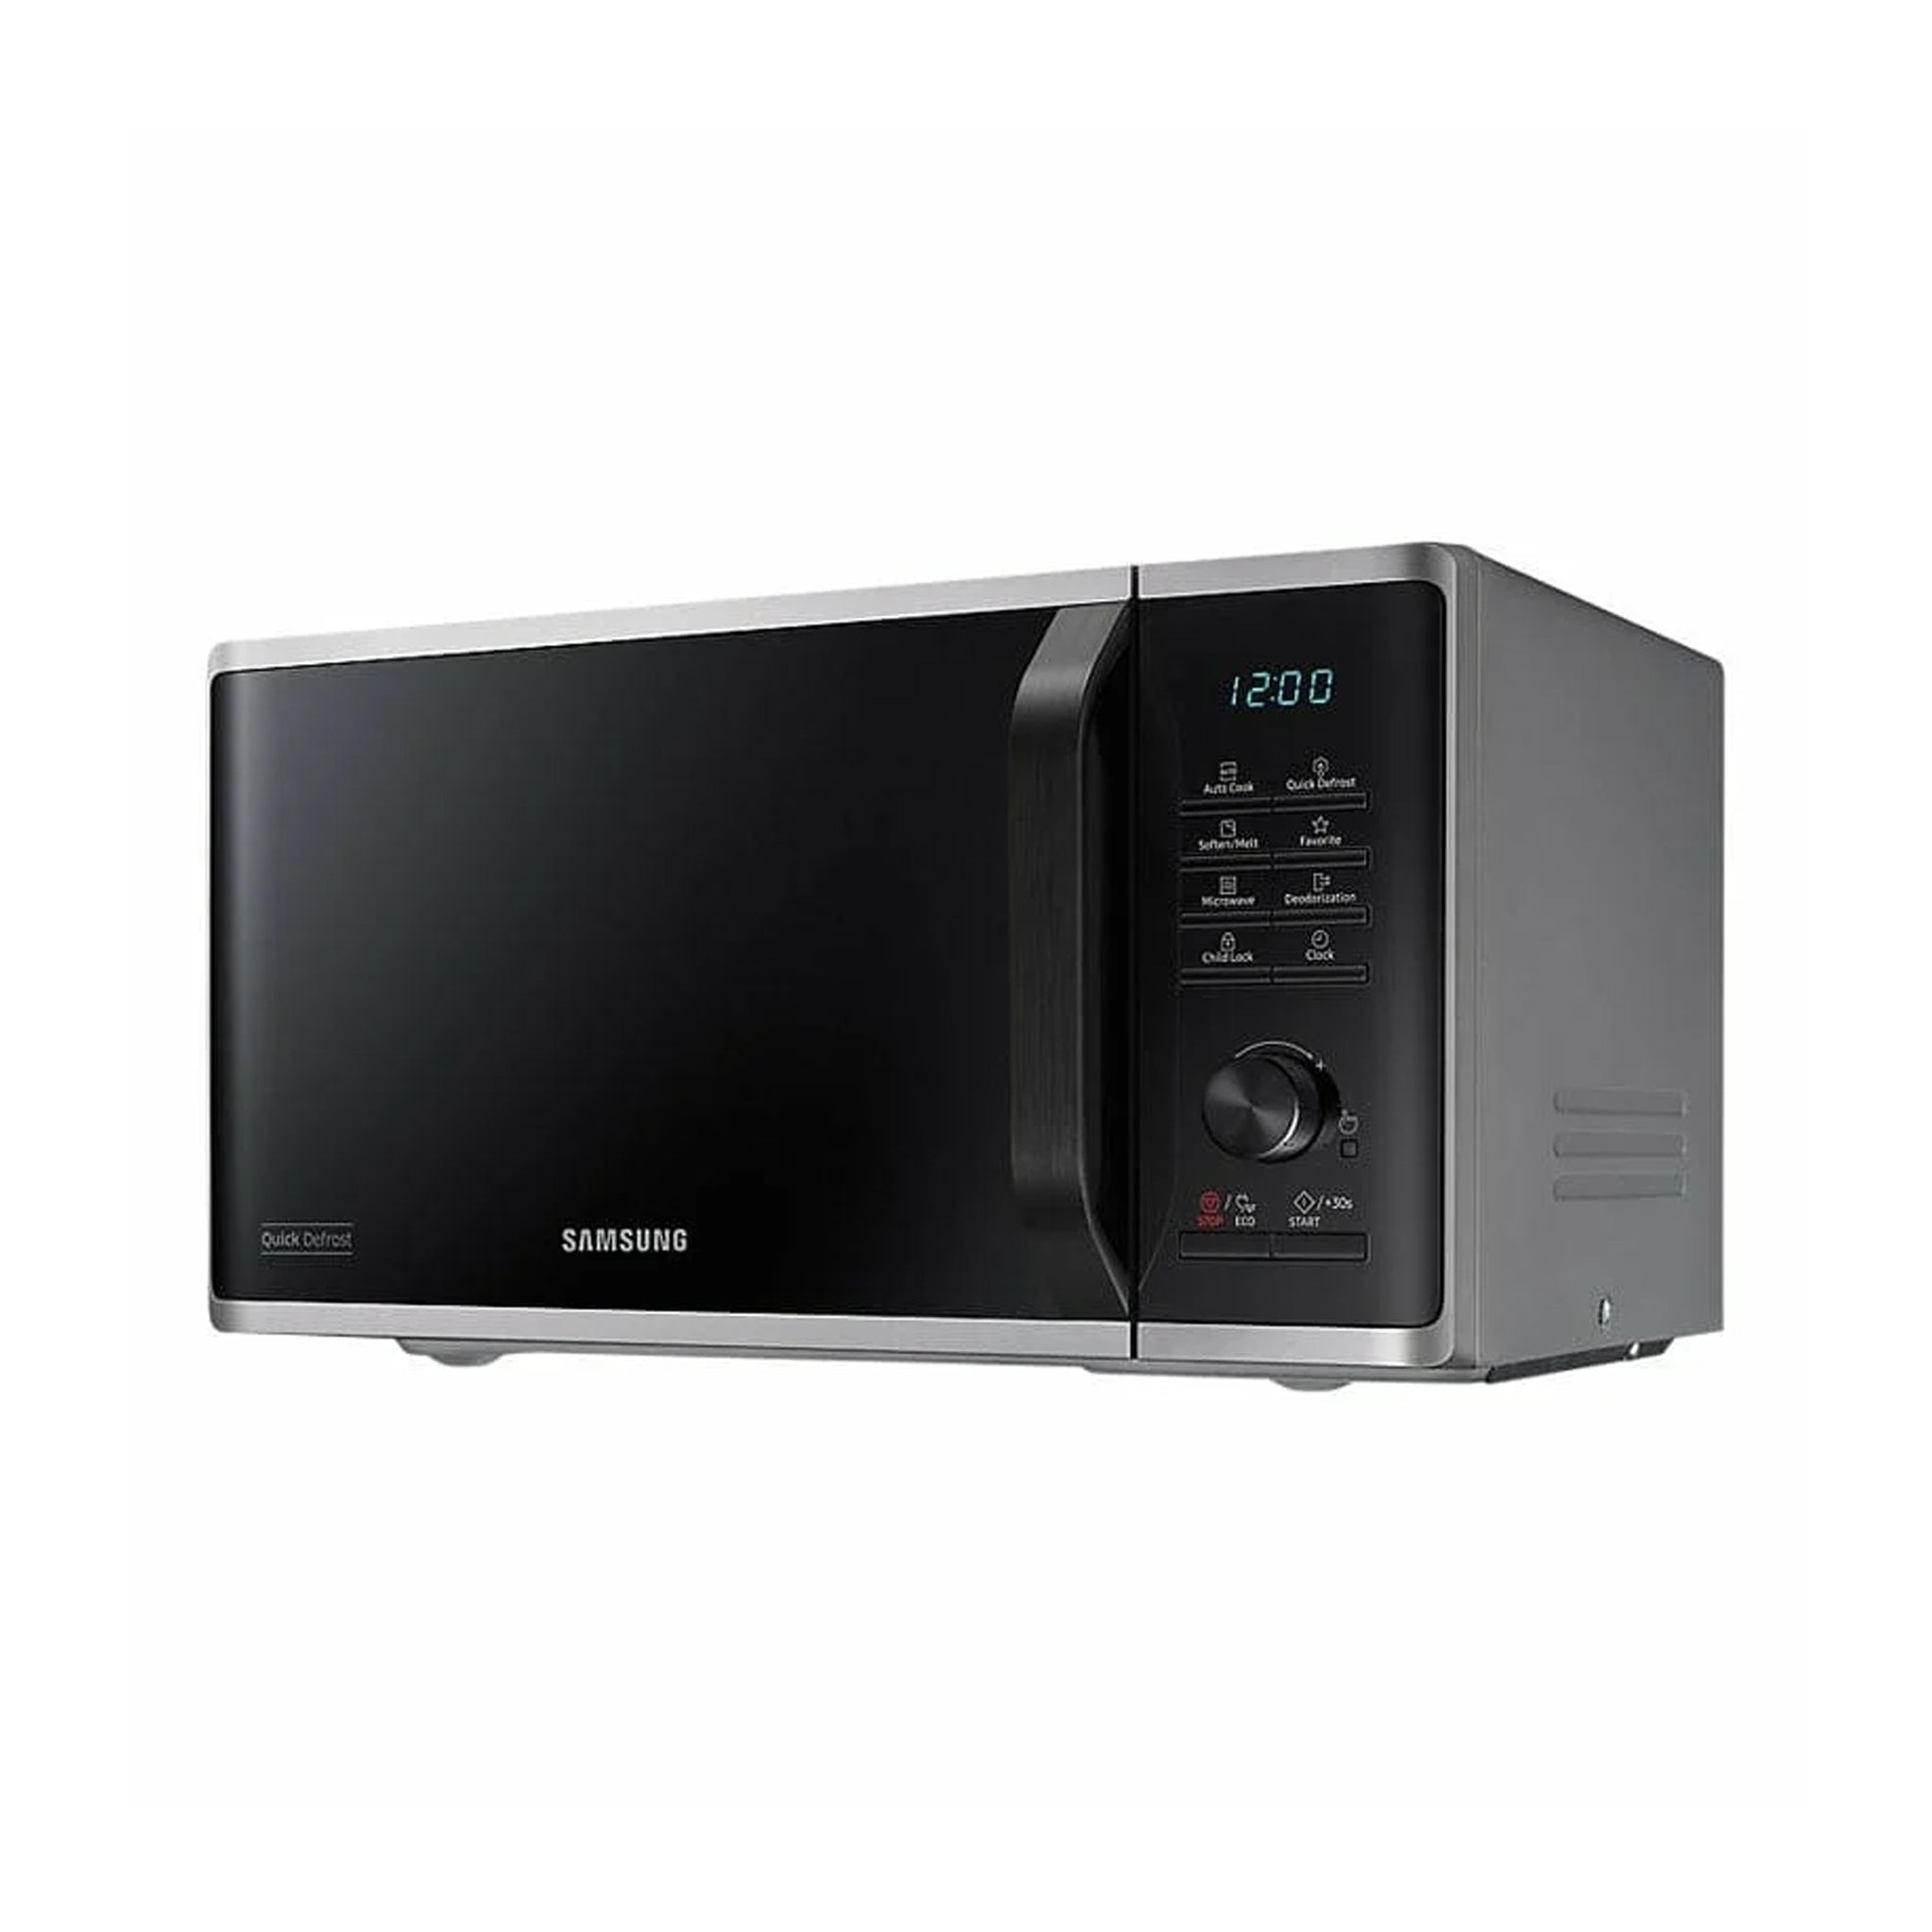 Samsung 23L MS23K3515AS Microwave Oven Samsung